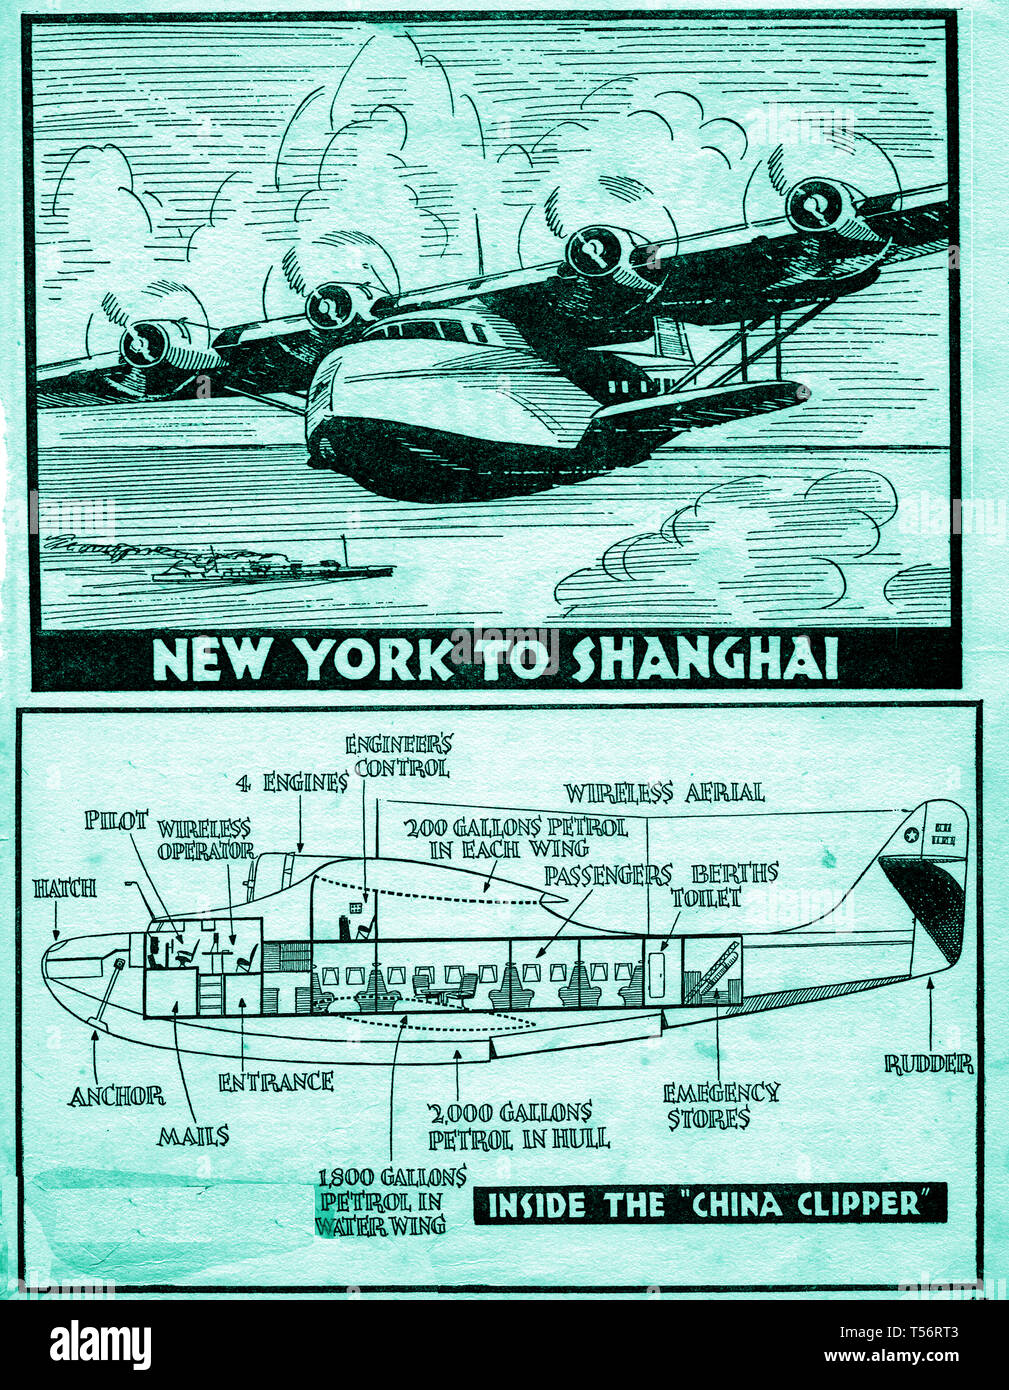 1935 The China Clipper, (aka 'Sweet Sixteen') aircraft, the biggest flying boat in the world at that time, flying New York to Shanghai carrying passengers and mail. Stock Photo